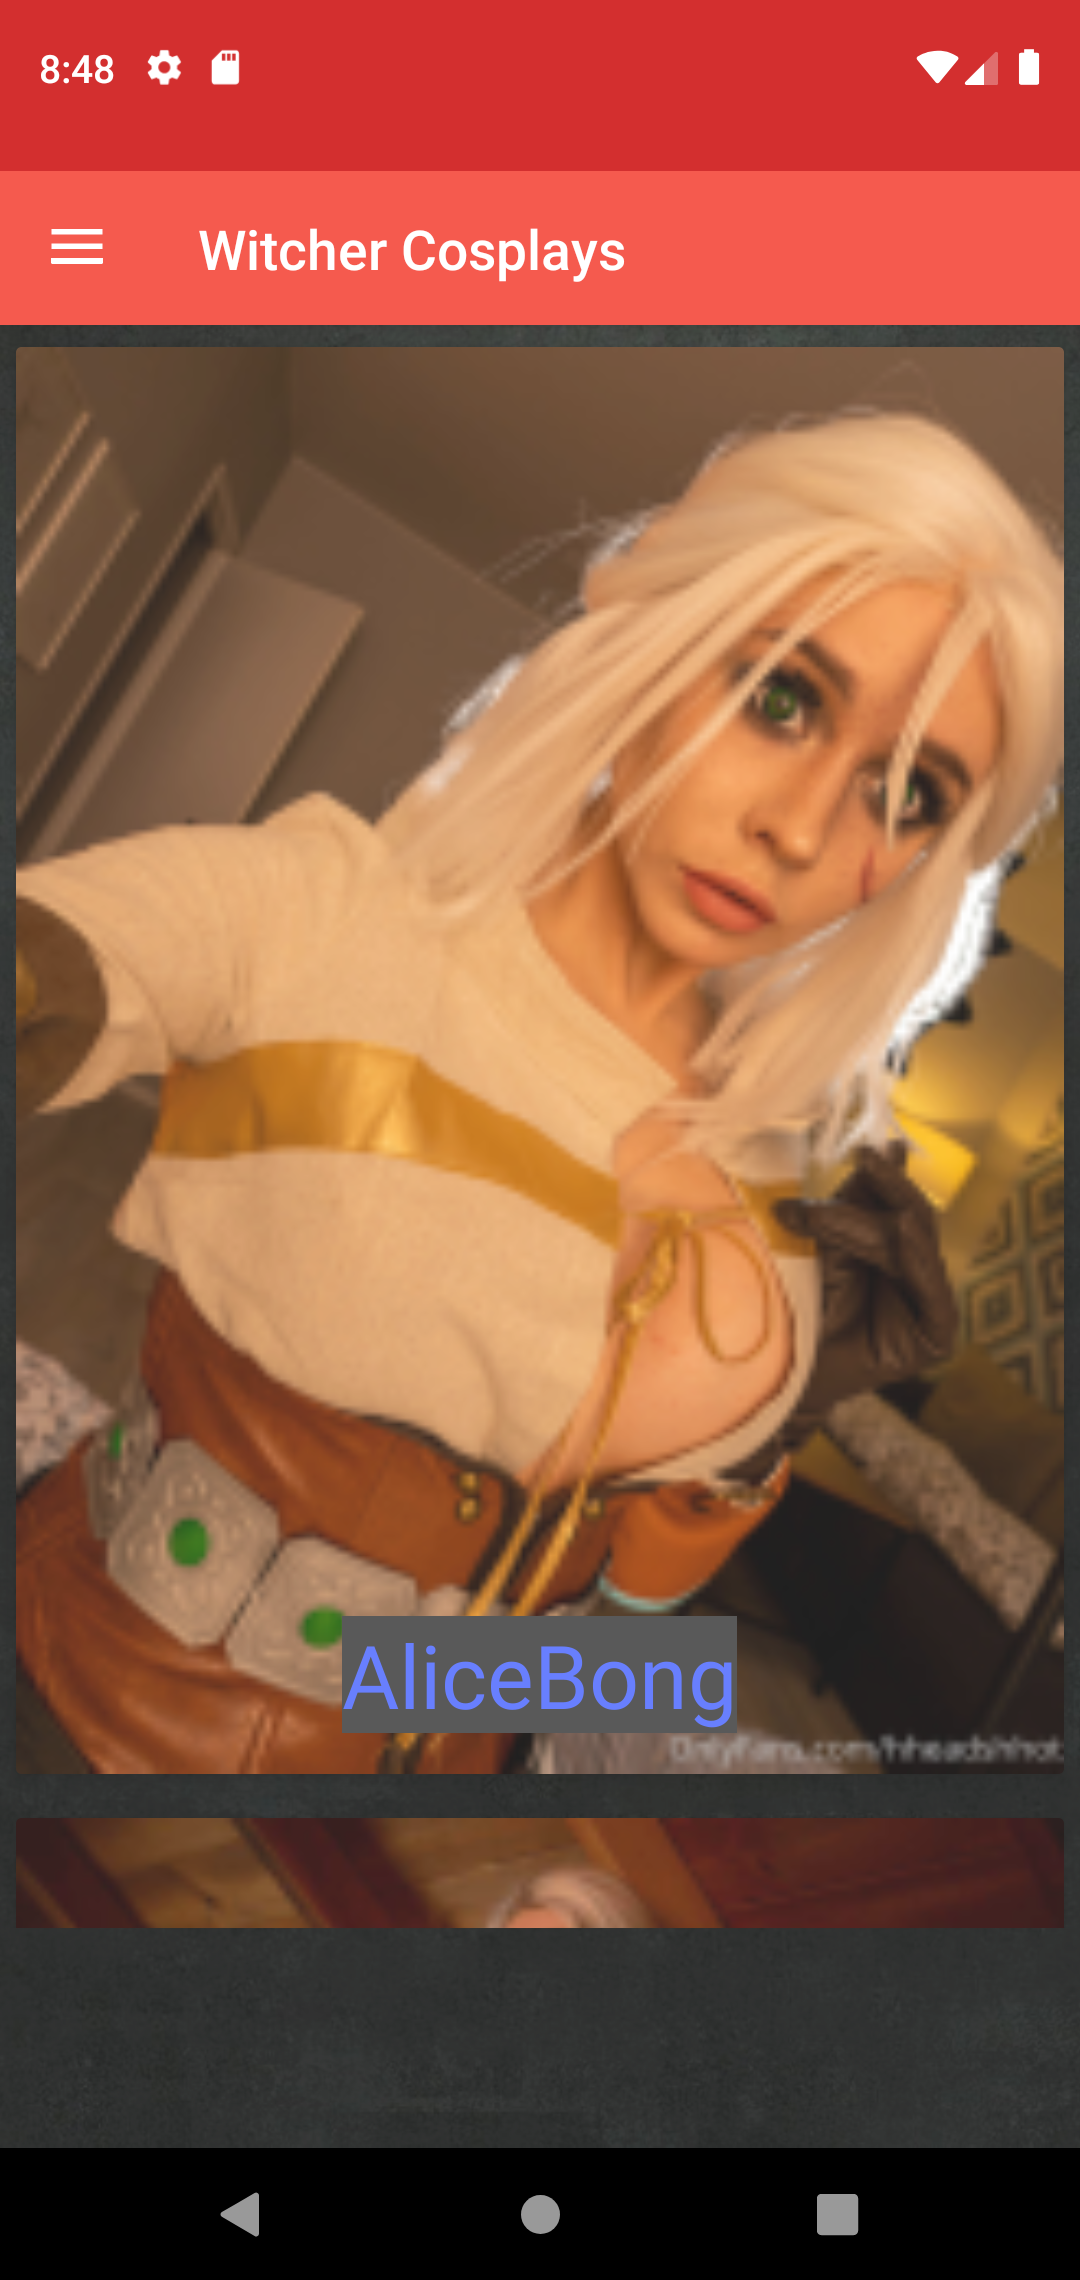 Witcher Cosplays wallpaper,hot,anime,apk,picture,pics,witcher,comics,henta,cosplay,porn,hebtai,hentai,sexy,photos,pic,download,mythras,adult,andriod,lair,app,erotic,free